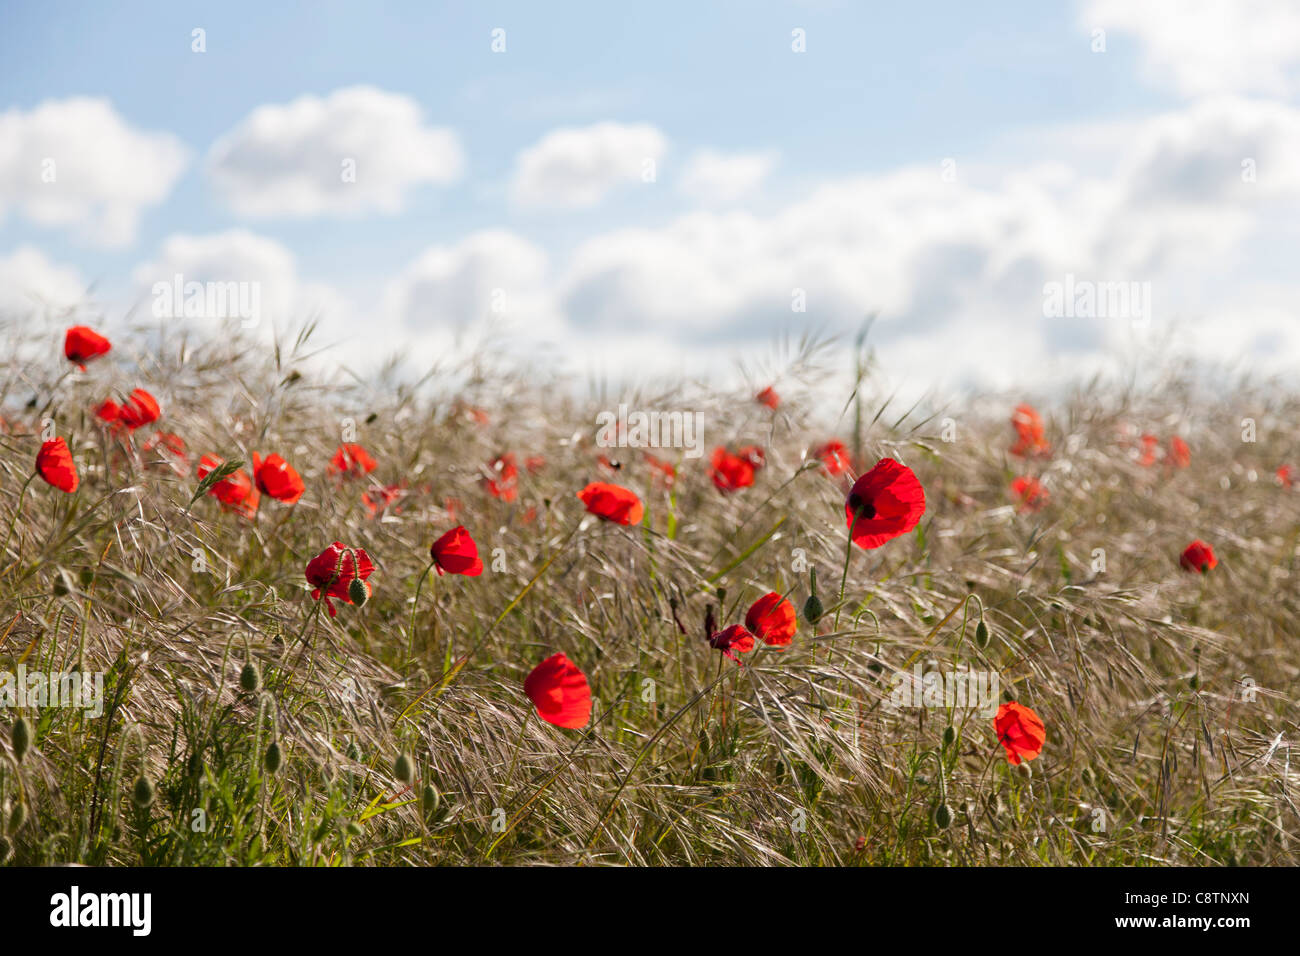 France, Picardy, Somme, Pont Remy, Red poppy flowers Stock Photo